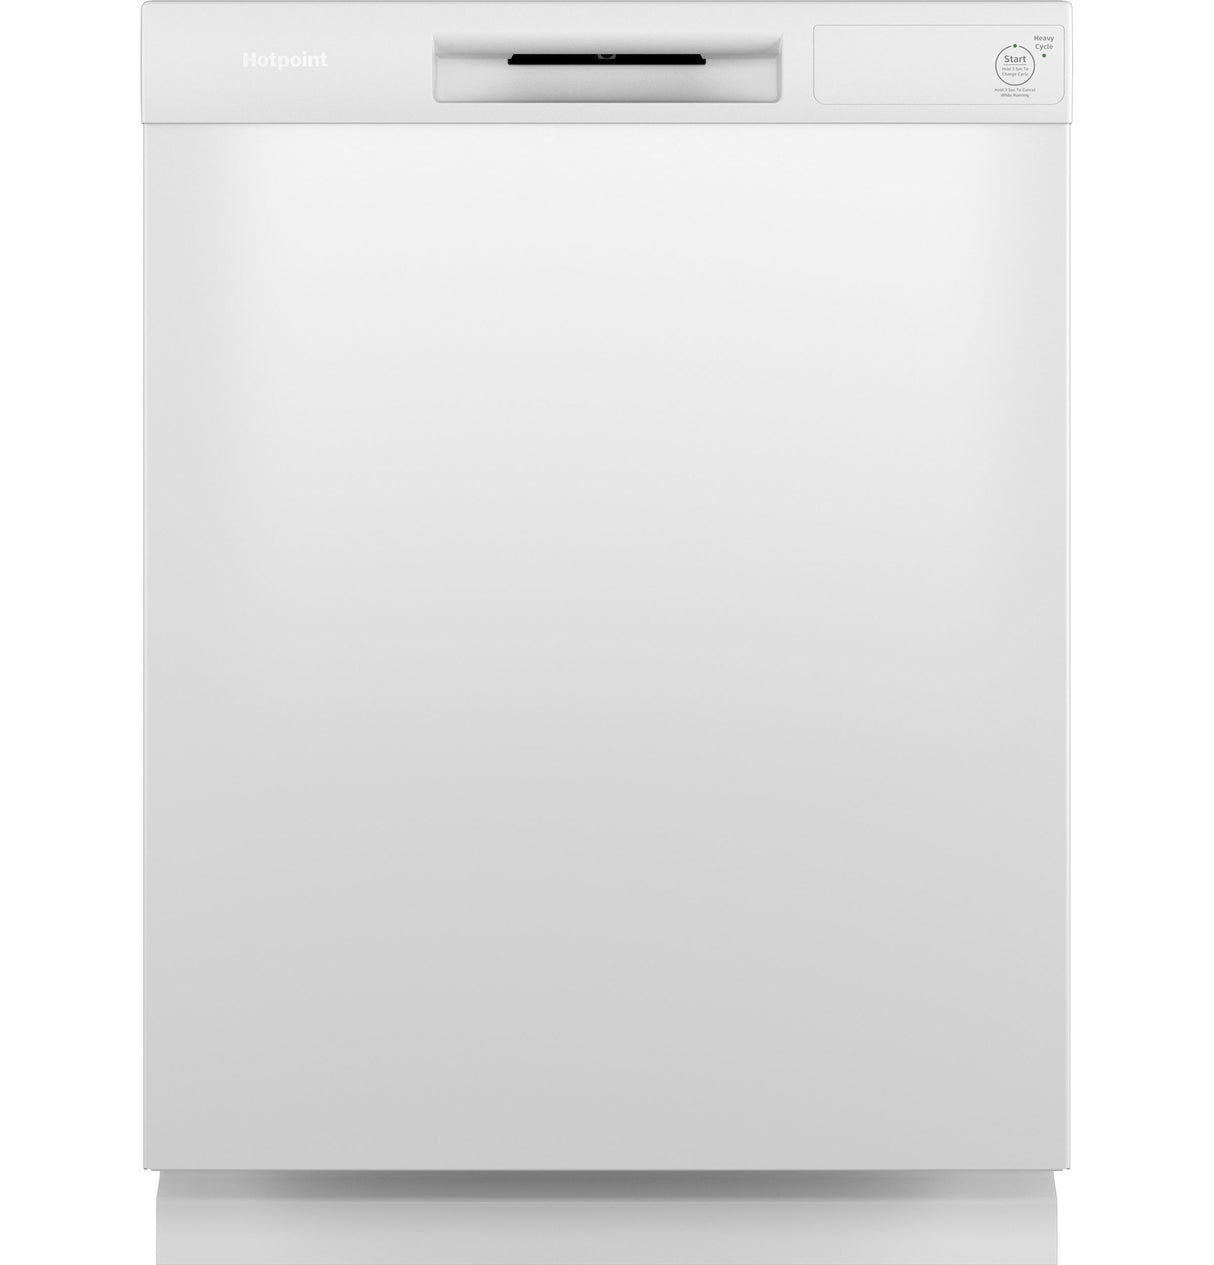 Hotpoint(R) One Button Dishwasher with Plastic Interior - (HDF310PGRWW)